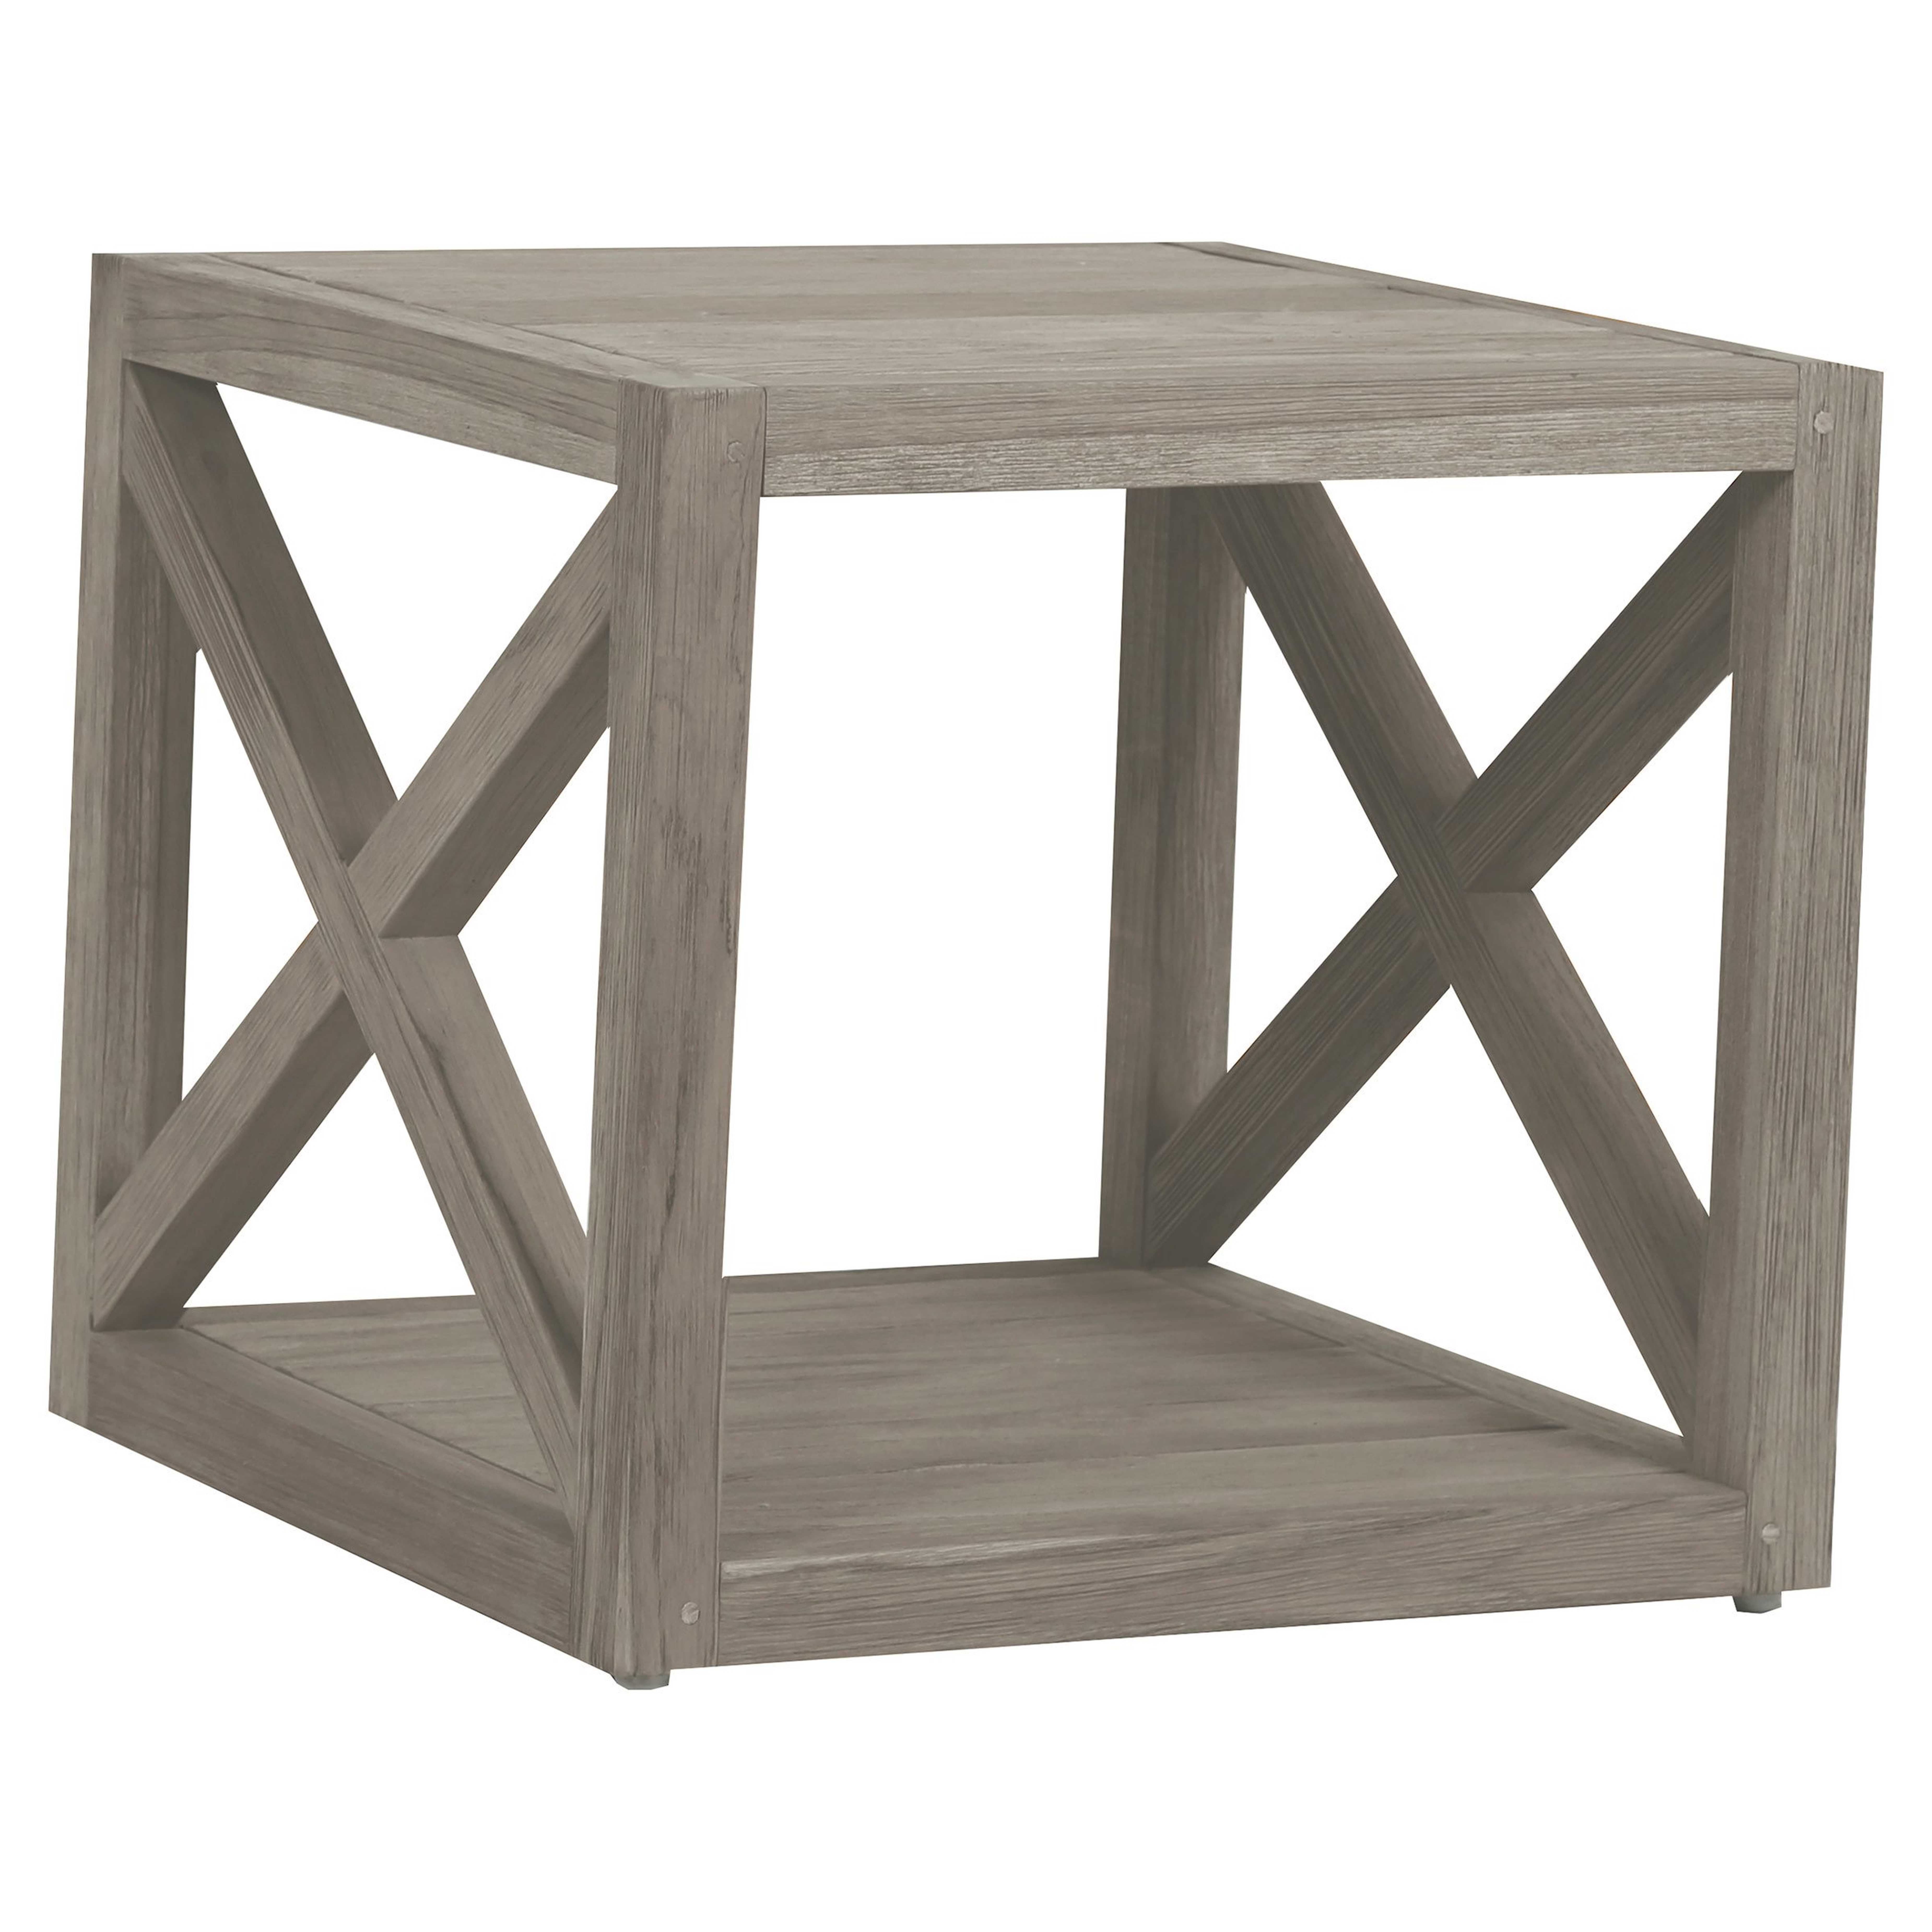 Sunset West Rustic Grey Teak Square Outdoor Side End Table - Kathy Kuo Home